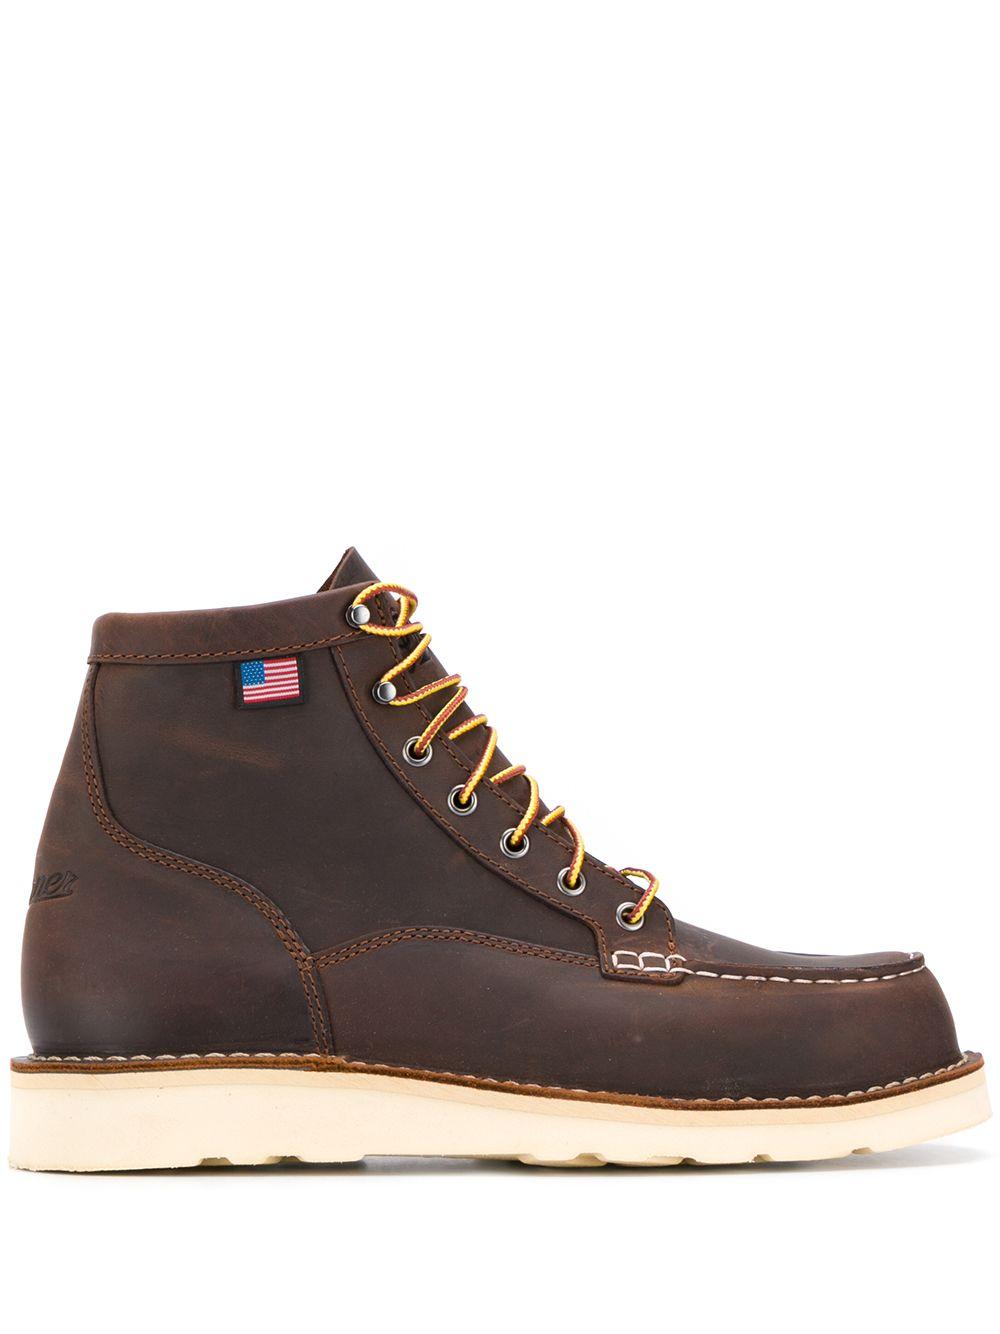 Danner Leather Bull Run Boots in Brown for Men - Save 55% - Lyst